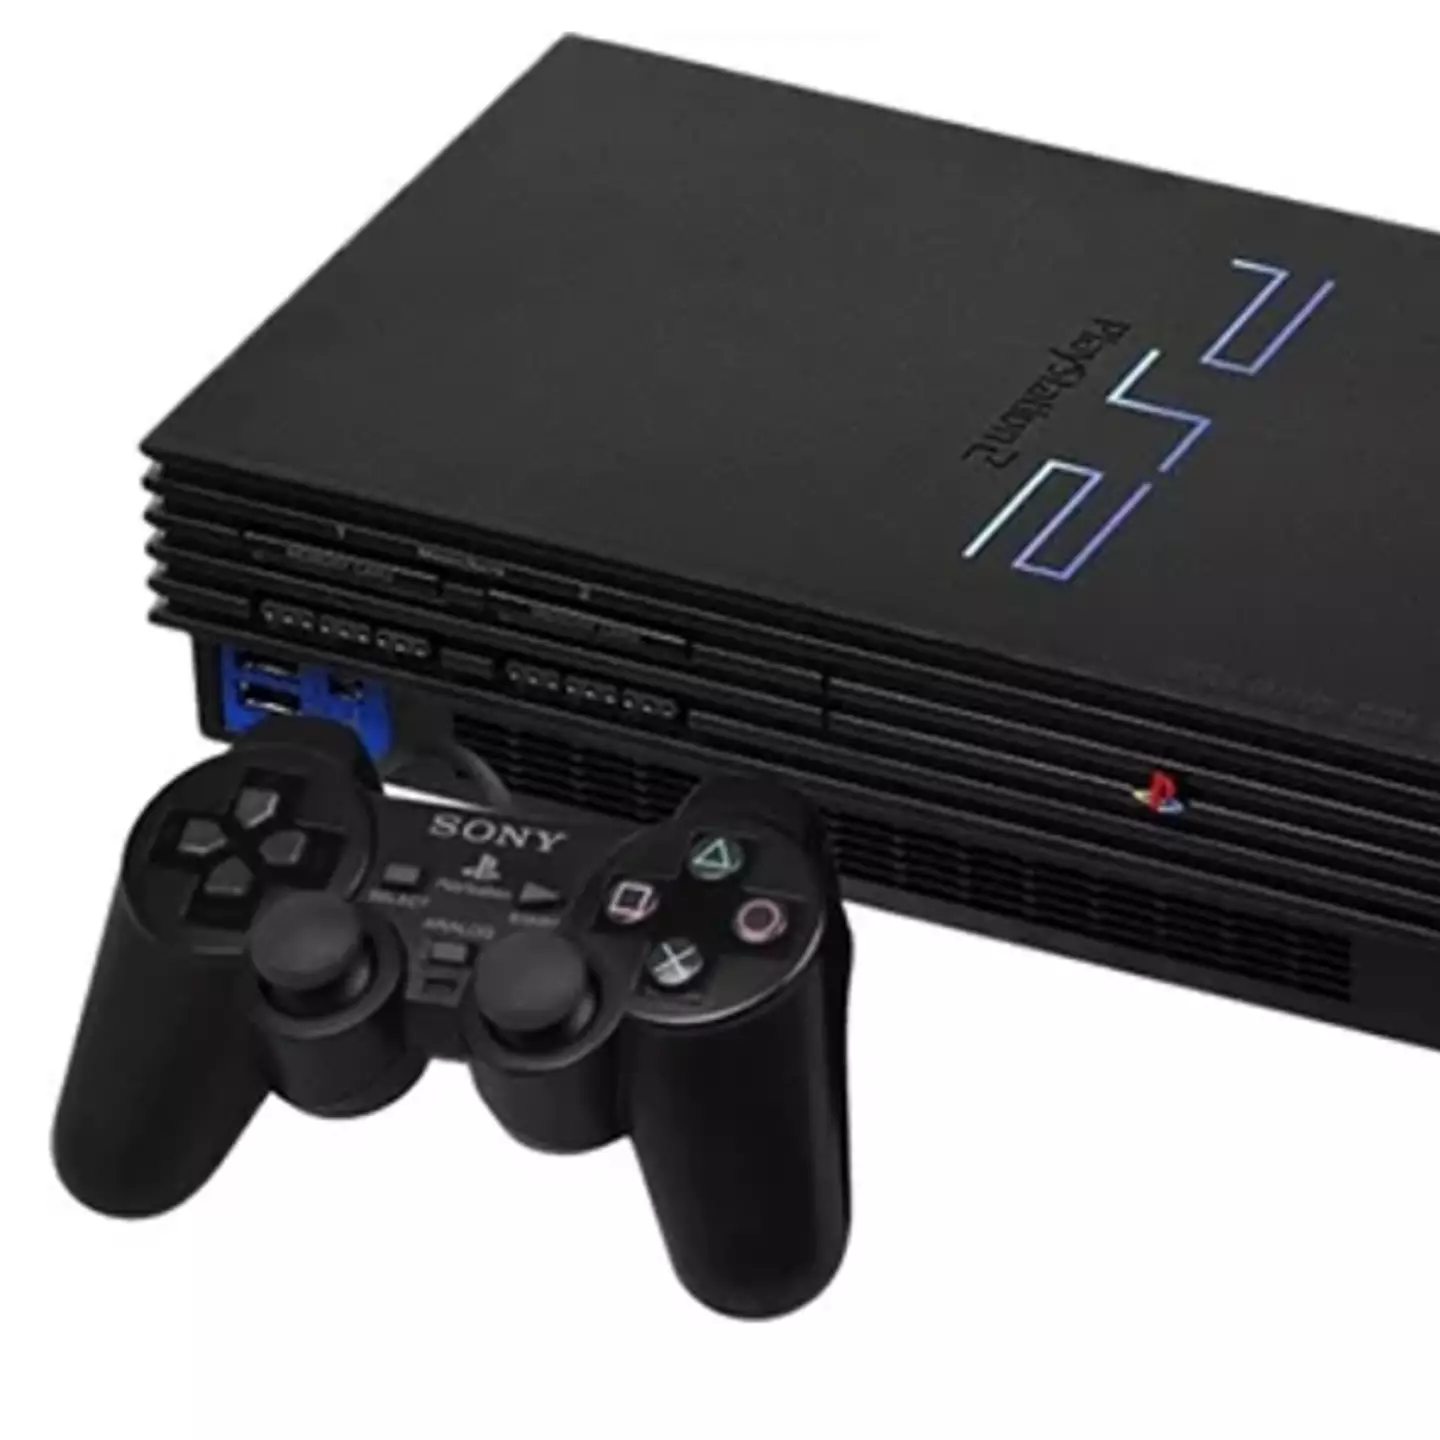 Banned PS2 game will get you arrested if you own a copy of it